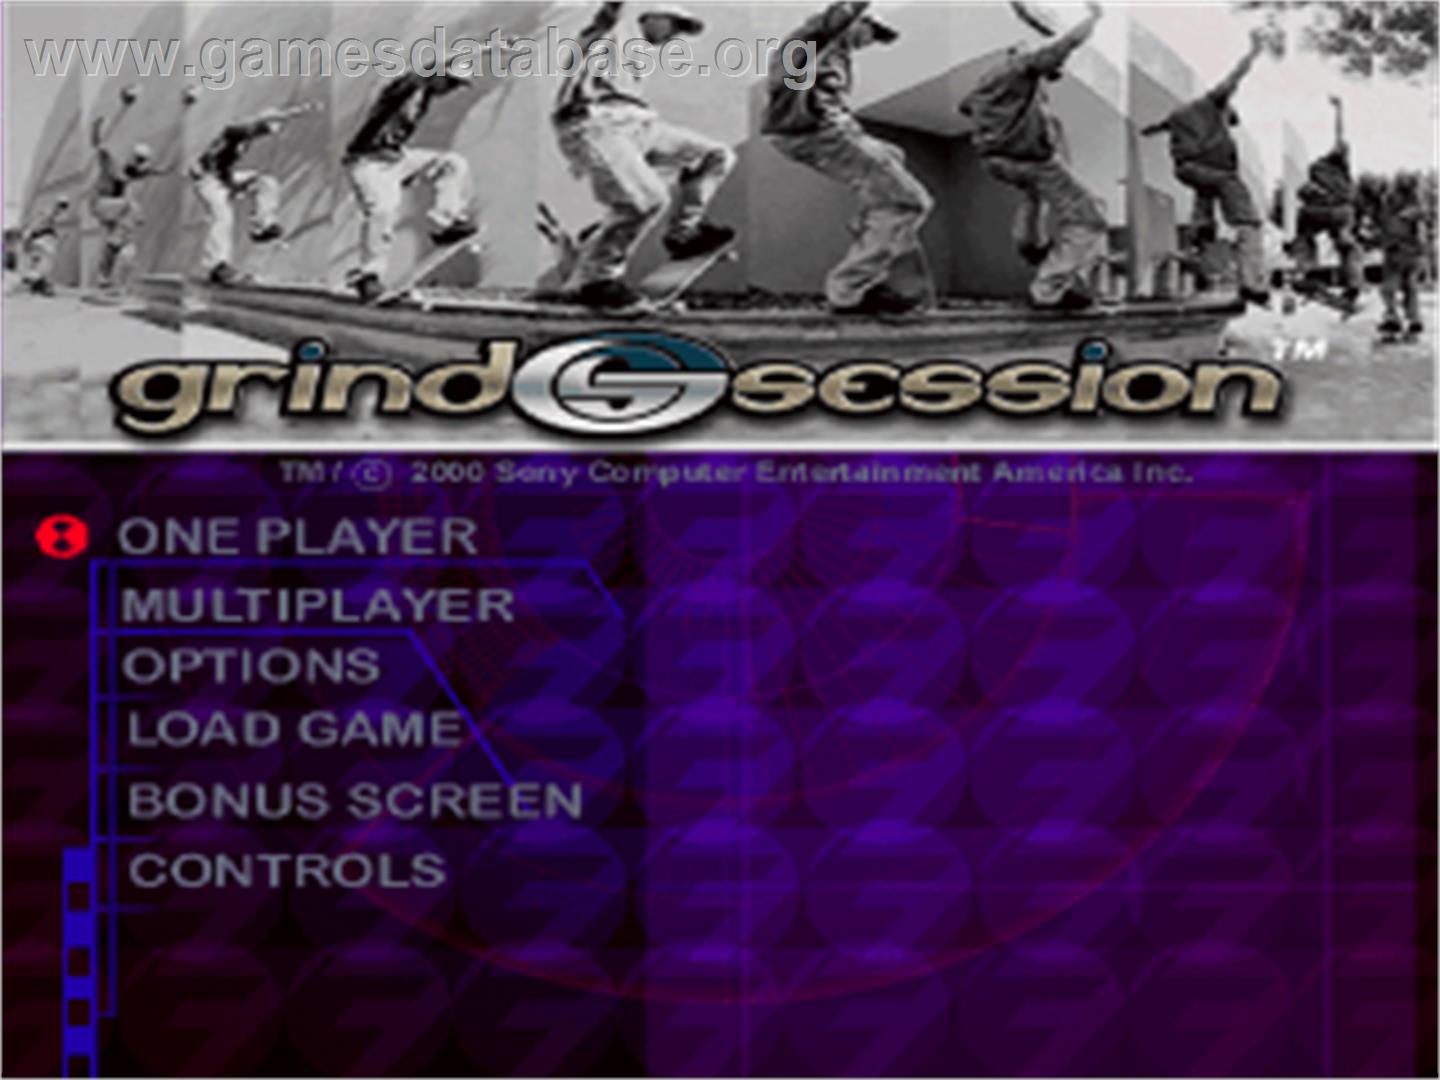 Grind Session - Sony Playstation - Artwork - Title Screen